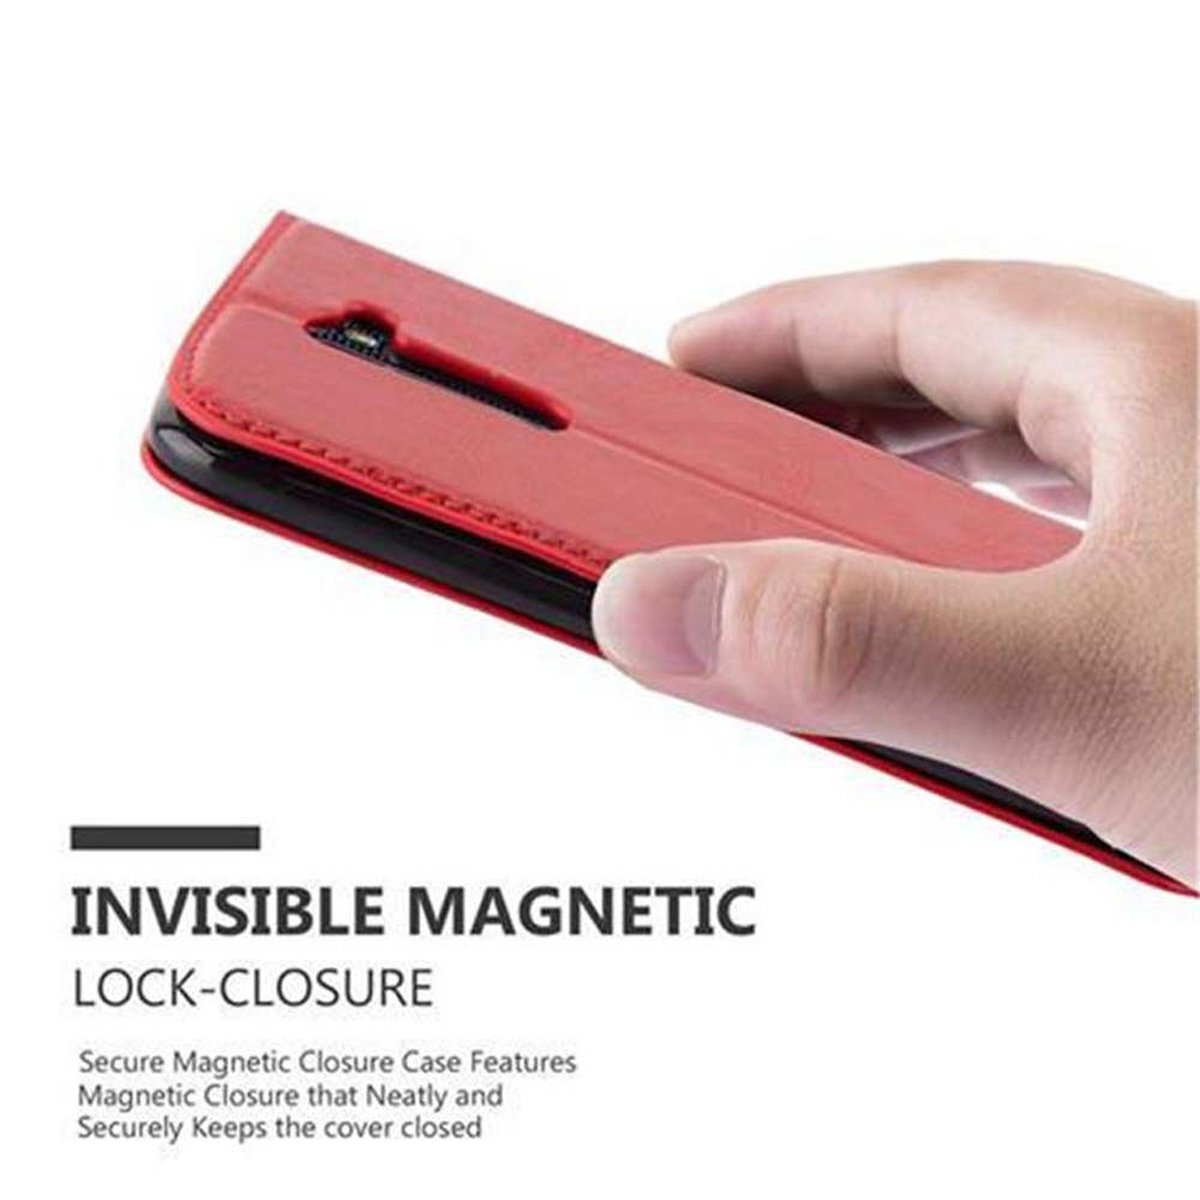 Bookcover, ROT Magnet, CADORABO 2016, LG, Hülle Invisible Book APFEL K10